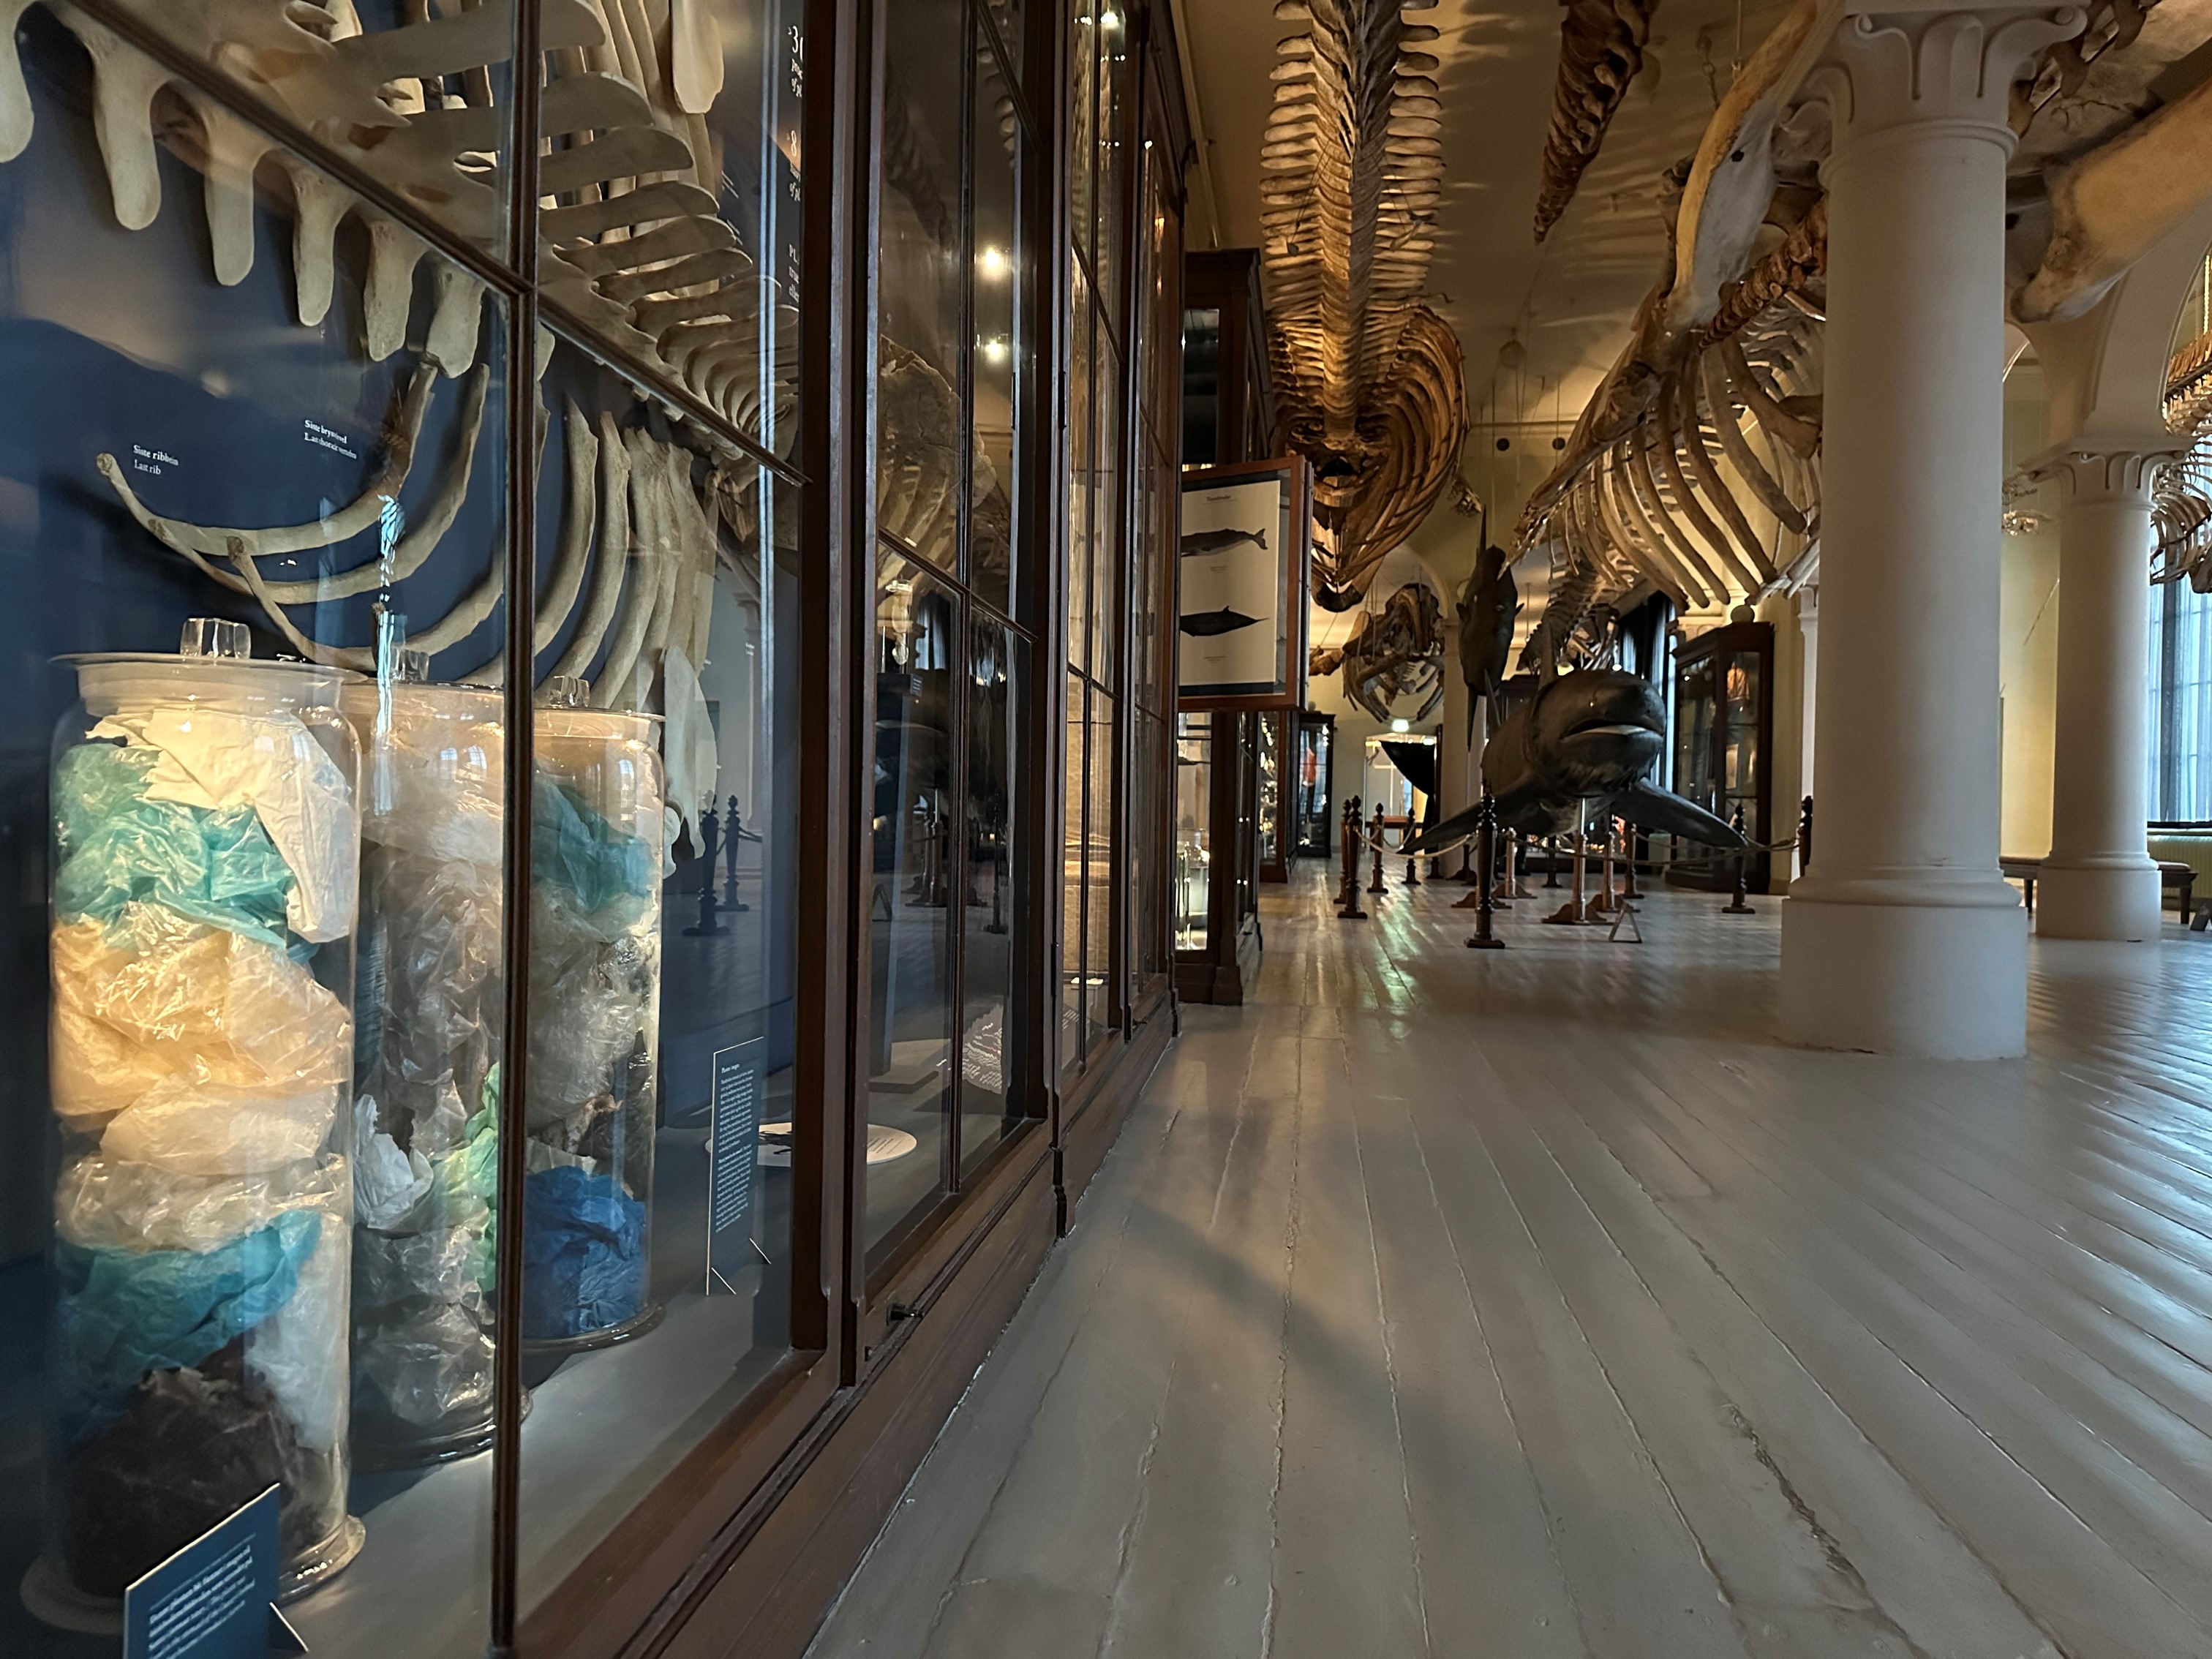 The whale room. A gallery in a museum displaying remains of whales